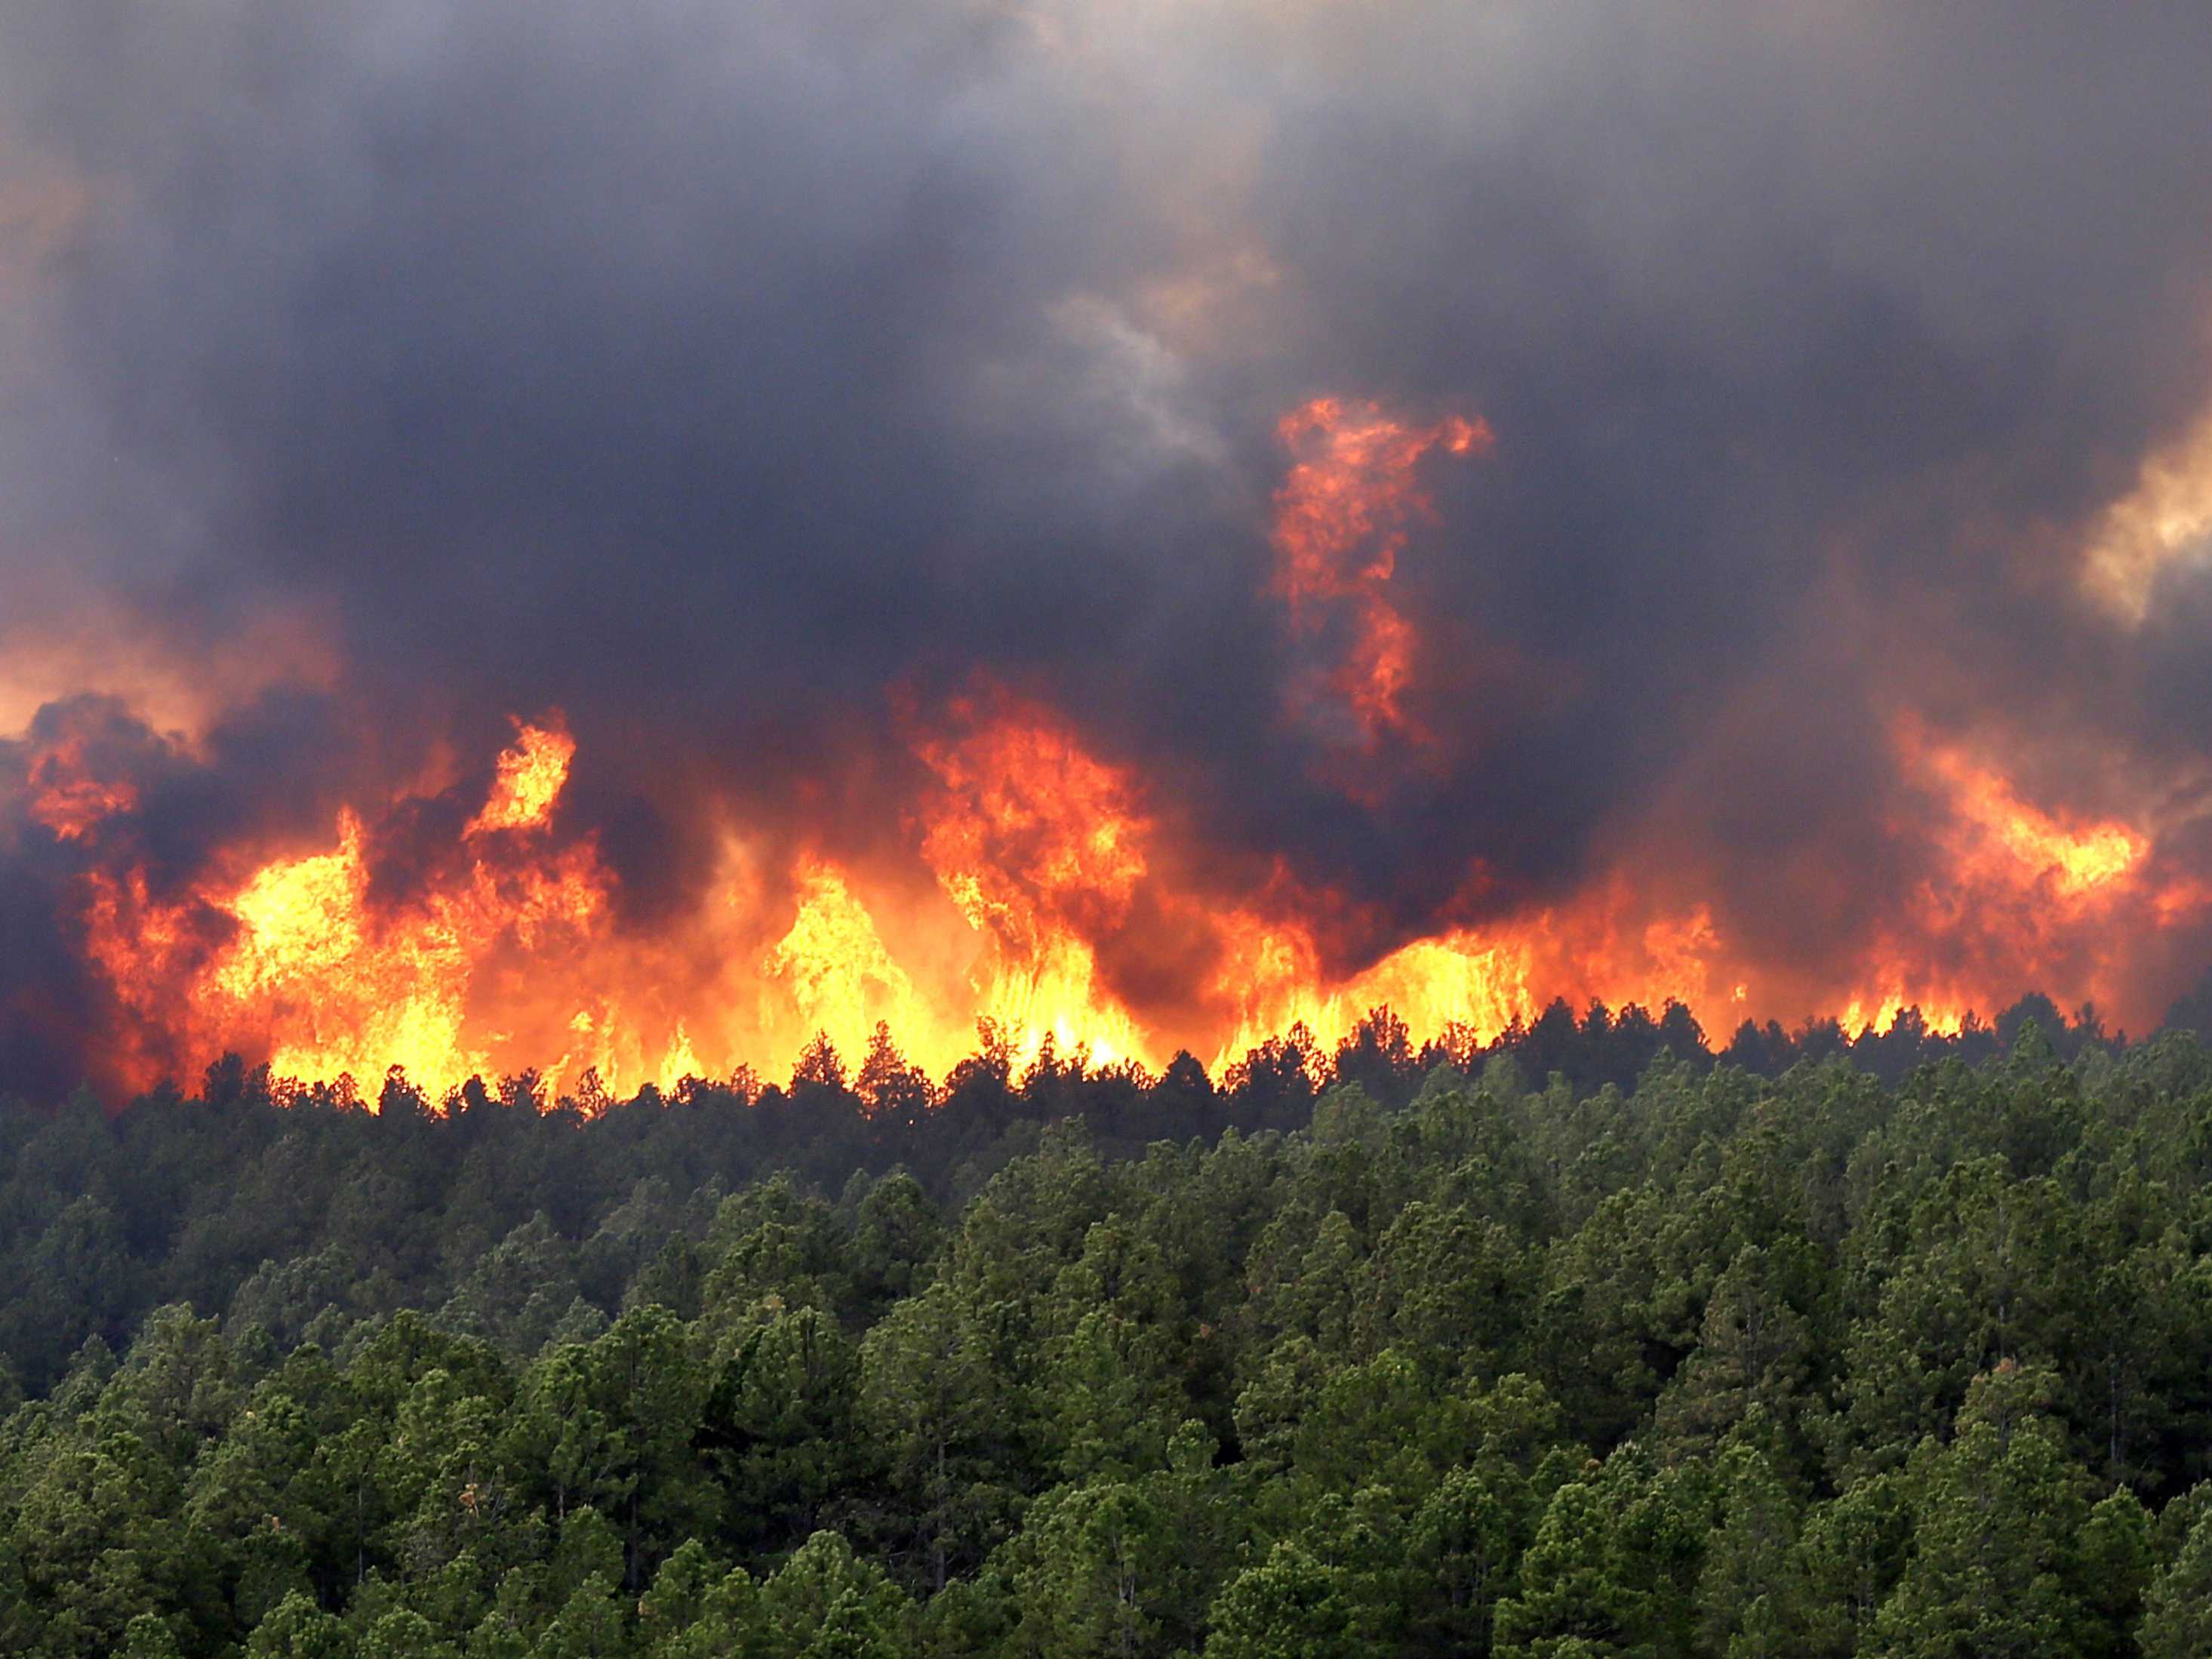 Image: Scientific evidence refutes media / politicians’ climate wildfire claims: ‘Less fire today than centuries ago’ – wildfires are NOT due to ‘climate change’ – book excerpt